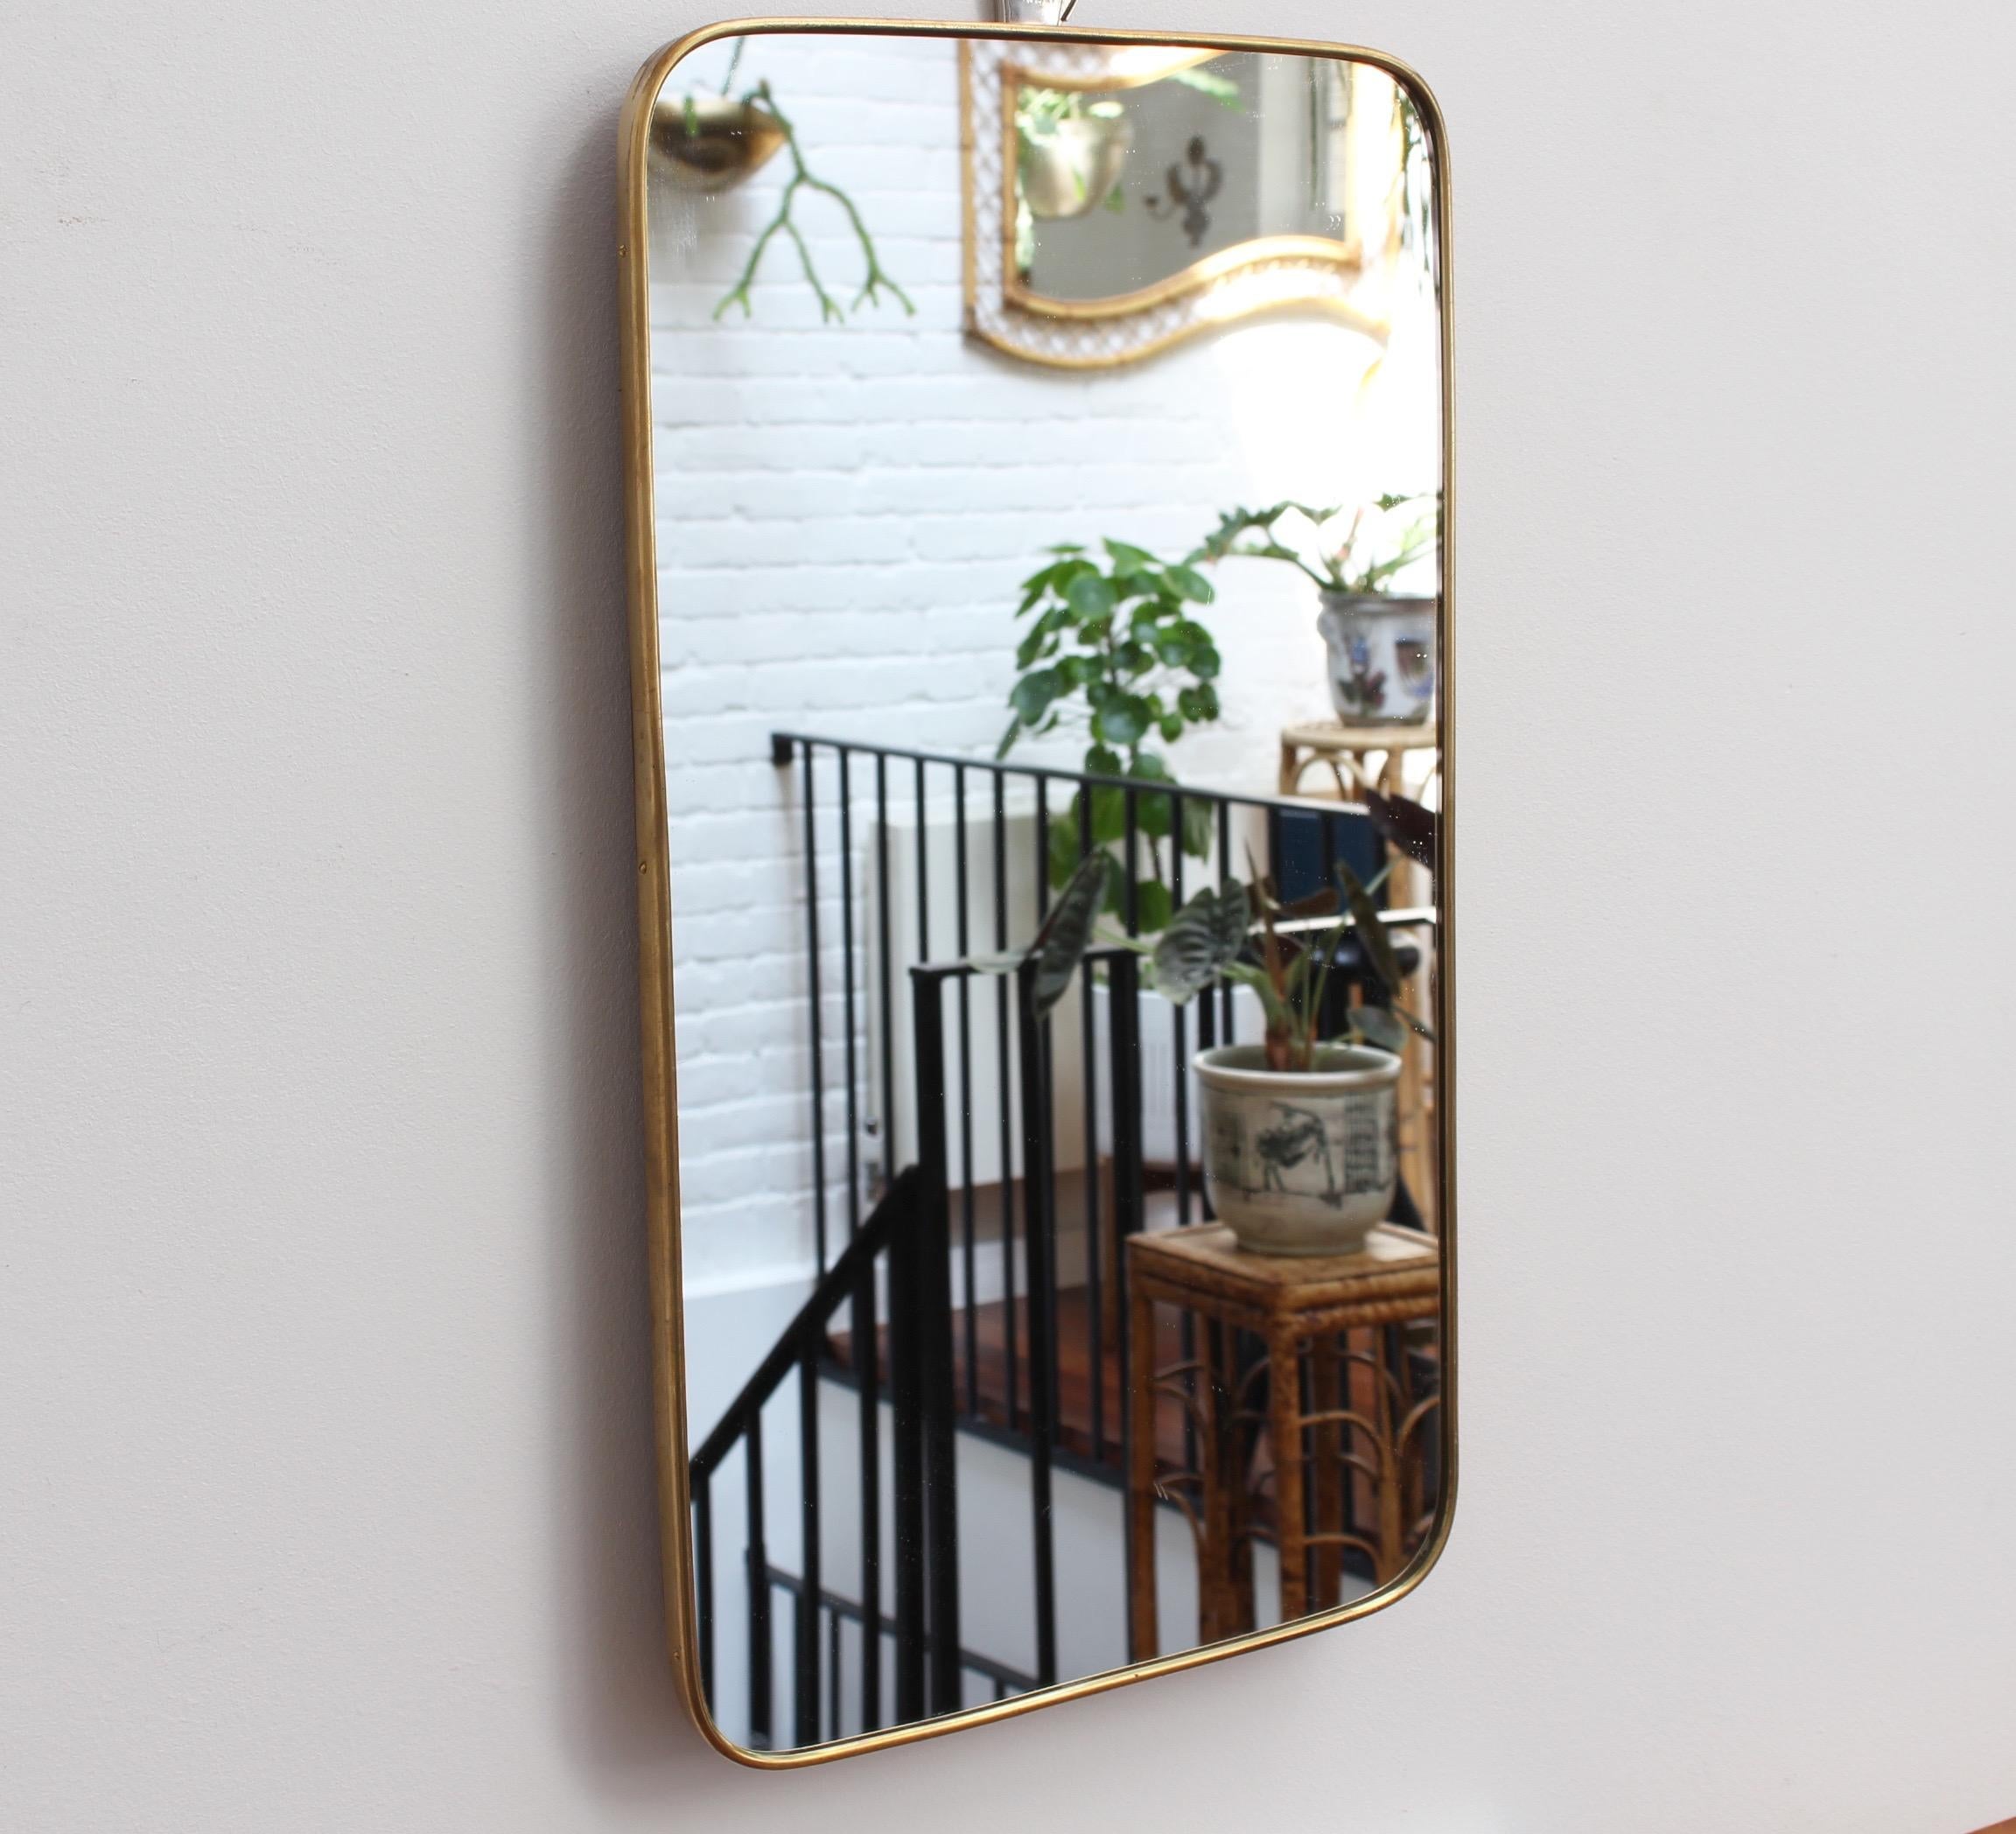 Small scale midcentury Italian wall mirror with brass frame, circa 1950s. The mirror is rectangular with sensuously curved edges. It is classically elegant and distinctive in a modern Gio Ponti style. Fittings are in place to allow it to be hung